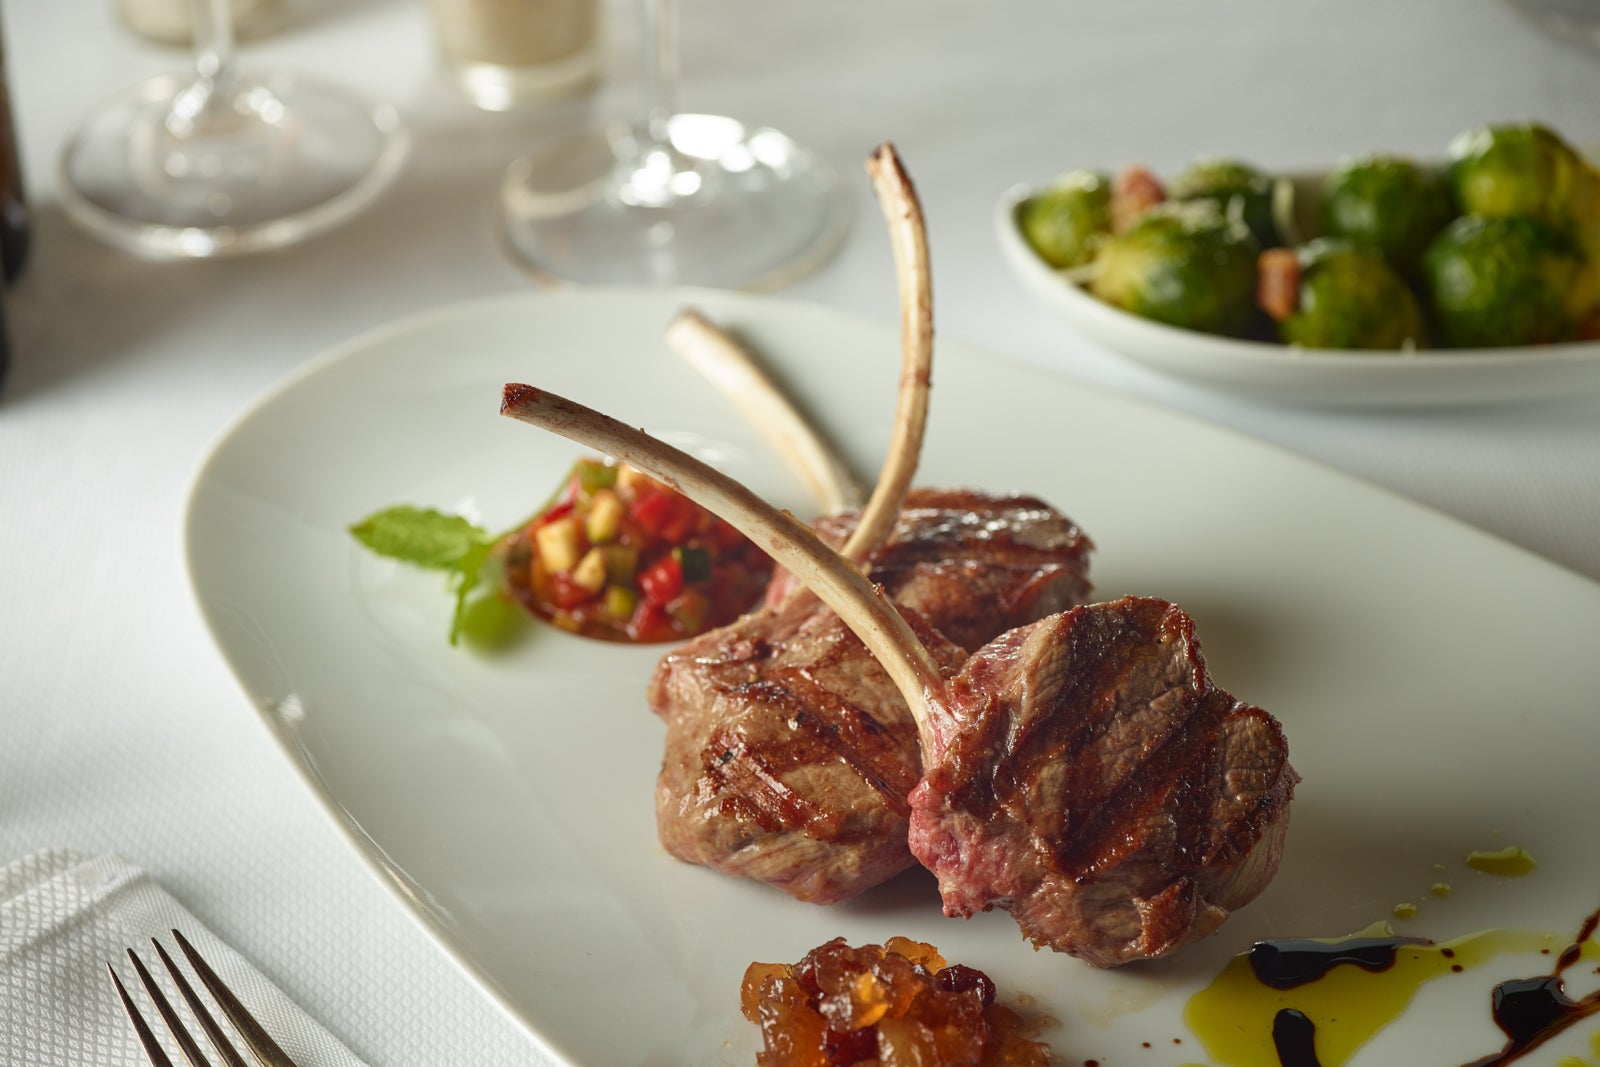 Lamb chops from cruise ship specialty restaurant